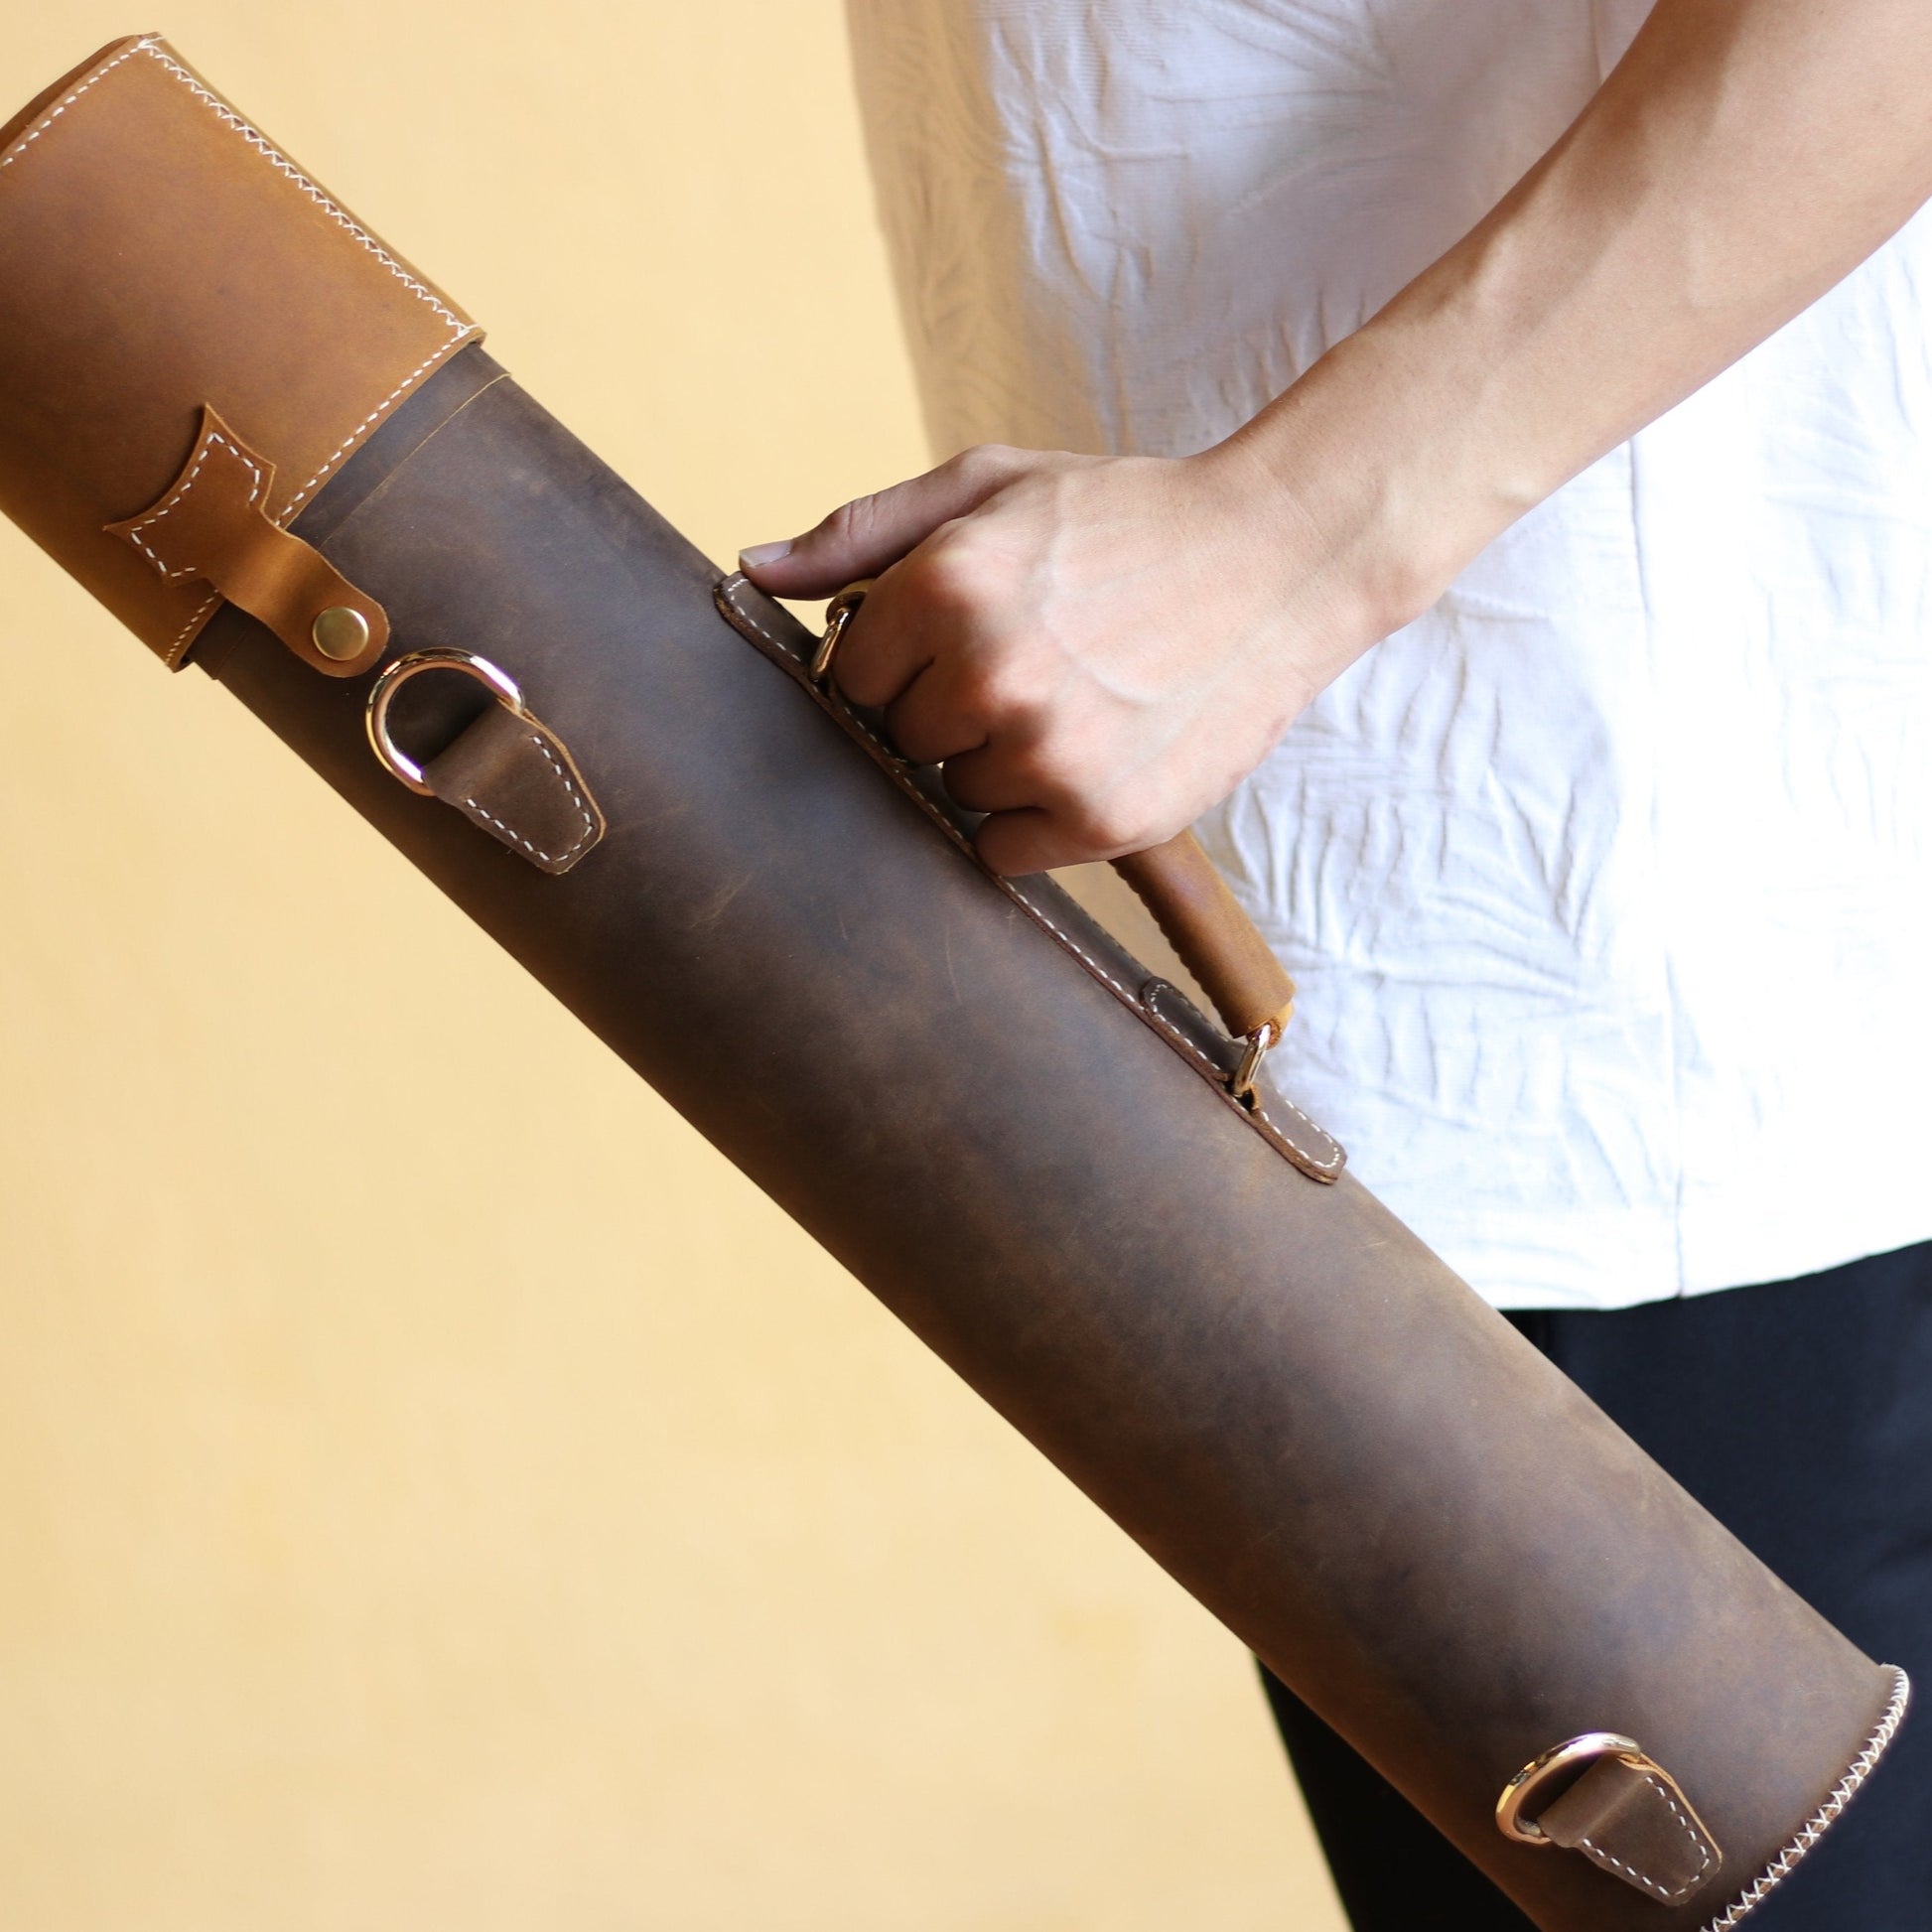 Leather Map Case the blueprint Tube a Leather Tube for Blueprints, Posters,  Maps, and Artwork 